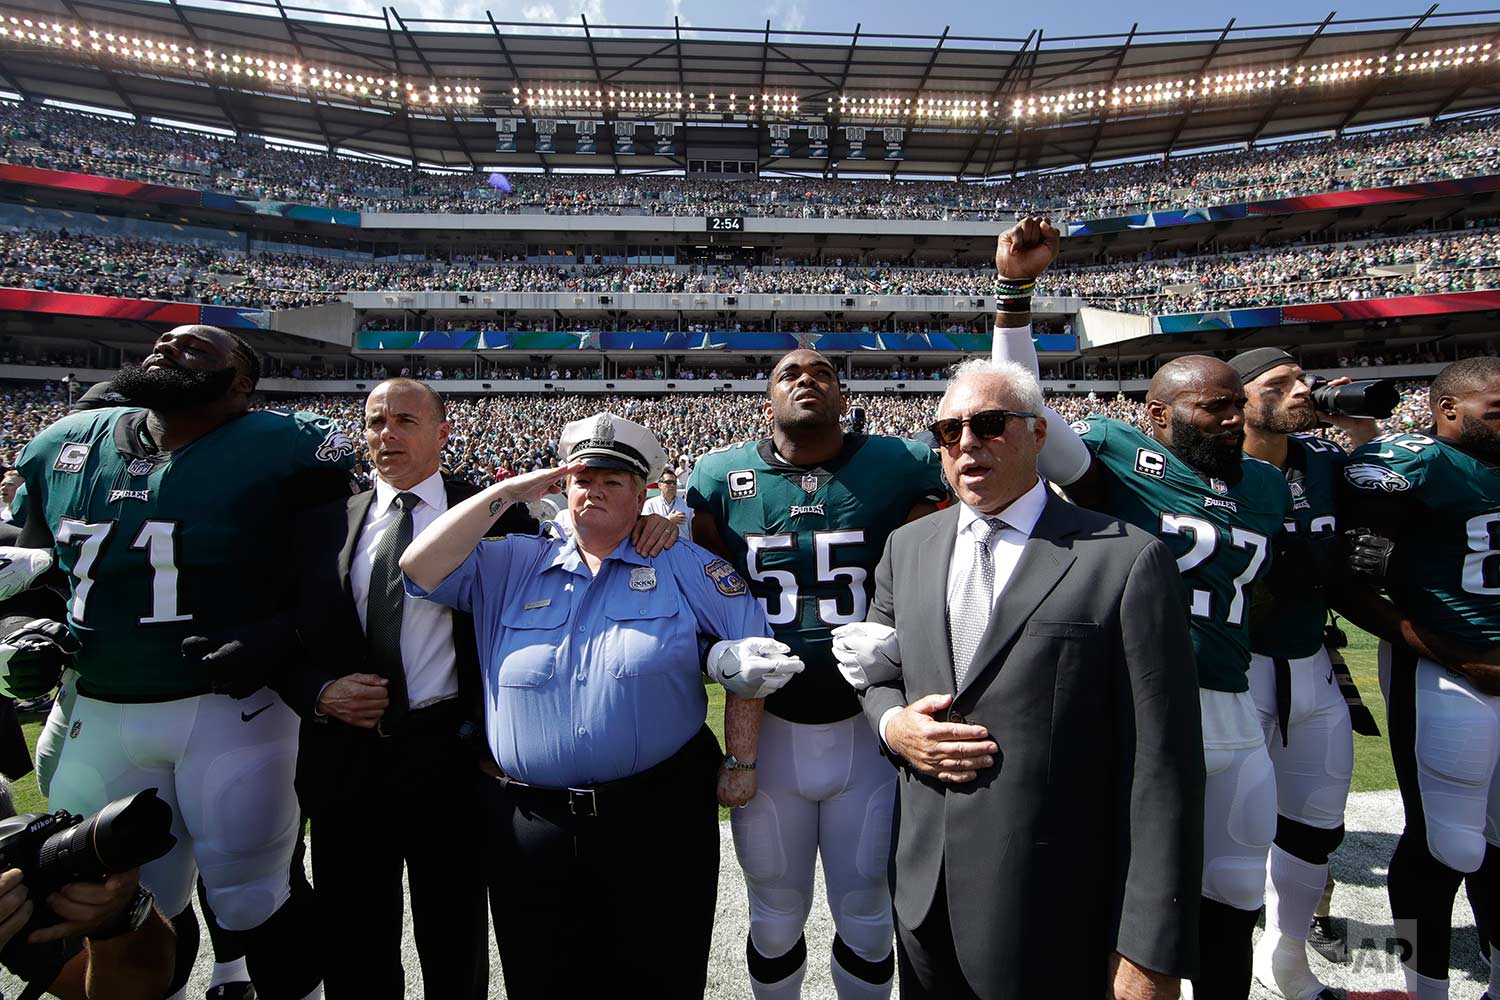  Philadelphia Eagles players, owner Jeffrey Lurie, center right, Eagles' President Don Smolenski, second from left, and a Philadelphia police officer, third from left, stand for the national anthem before an NFL football game against the New York Gia